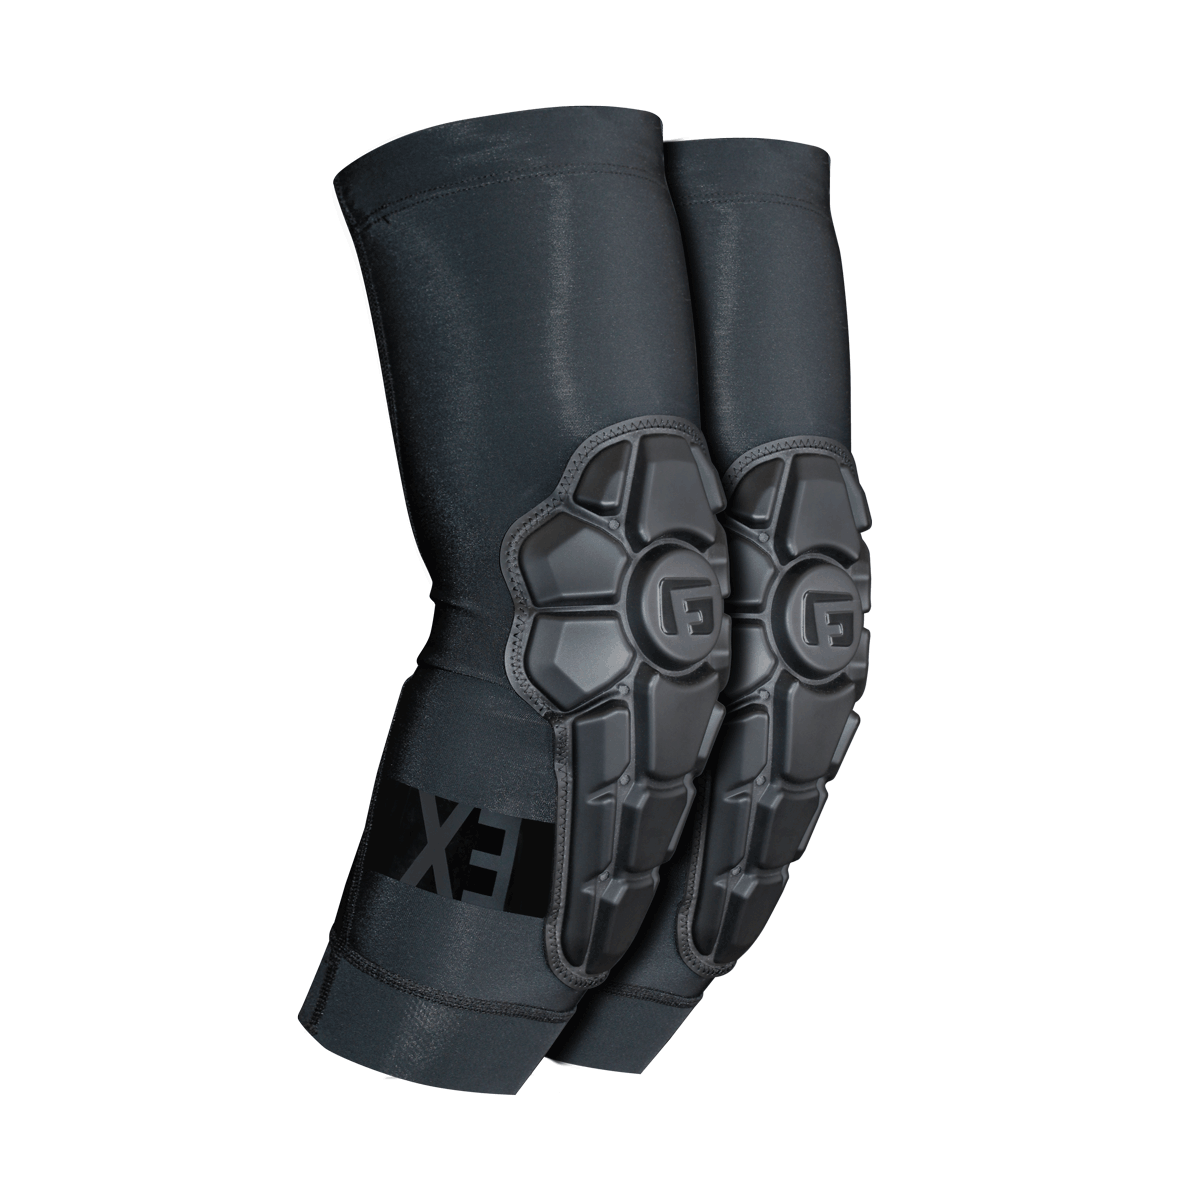 elbow guards for biking